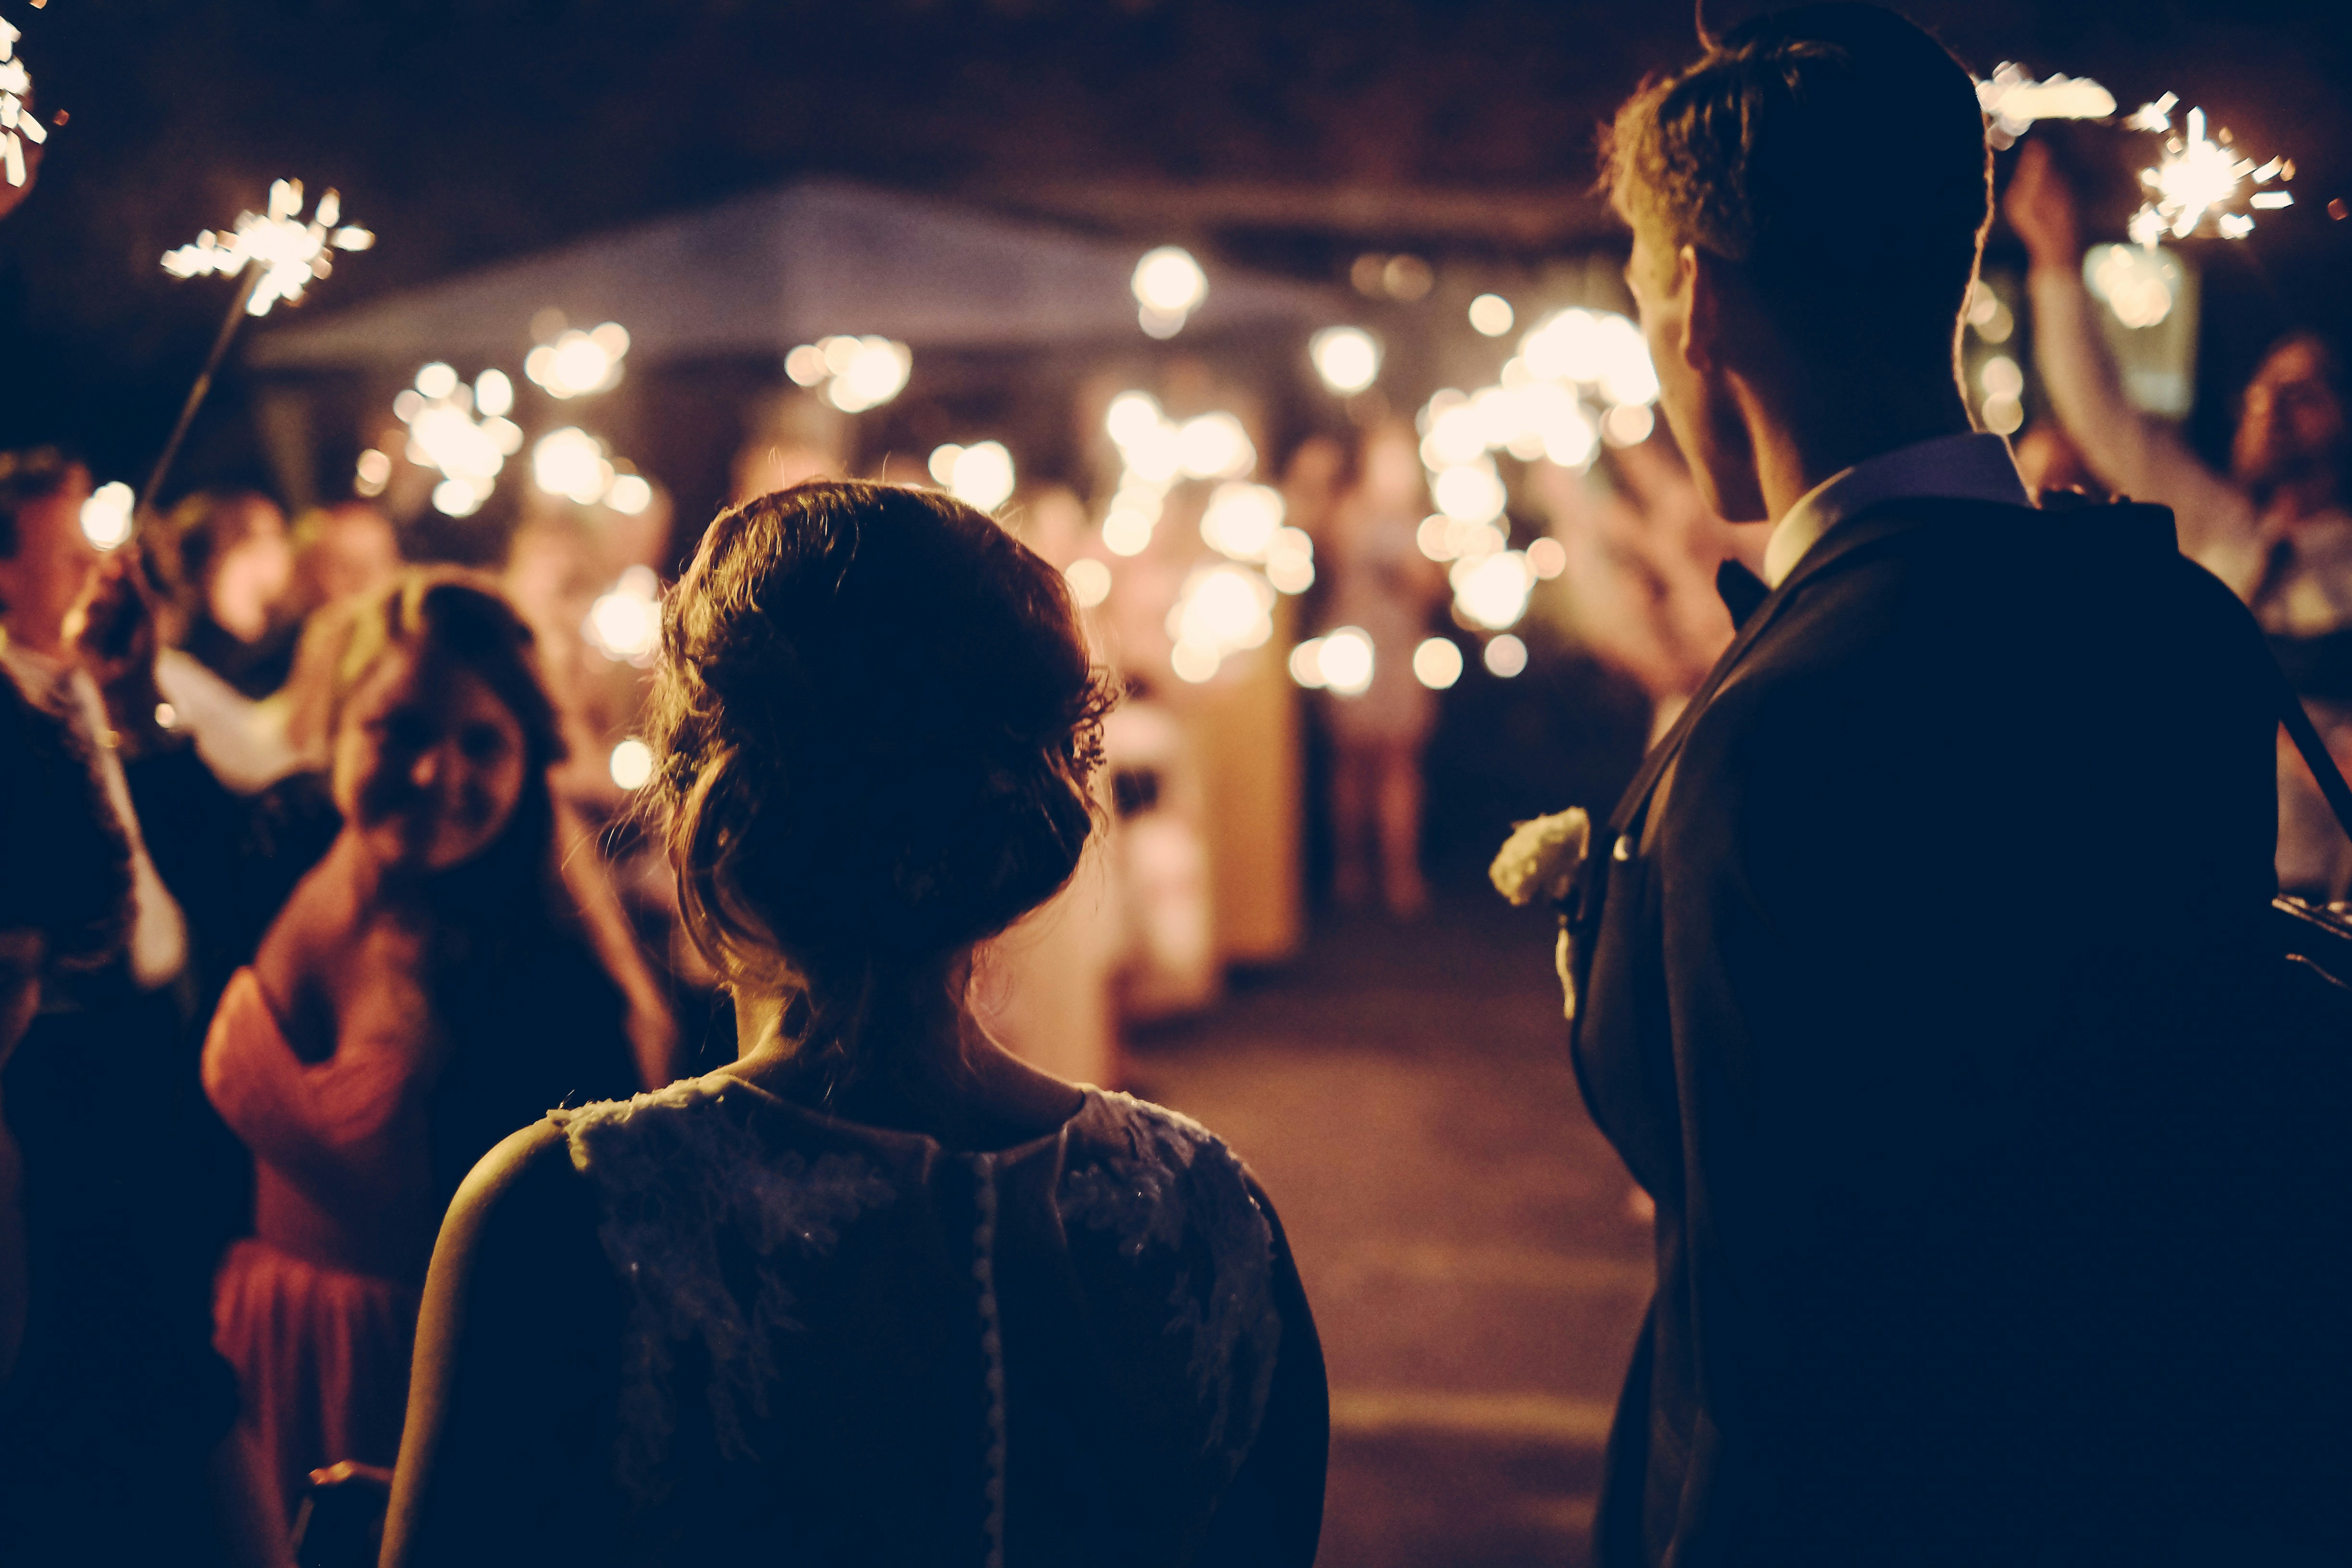 'I have never been so mortified in my entire life': Father interrupts his nemesis's son's wedding reception with an "extremely embarrassing announcement"